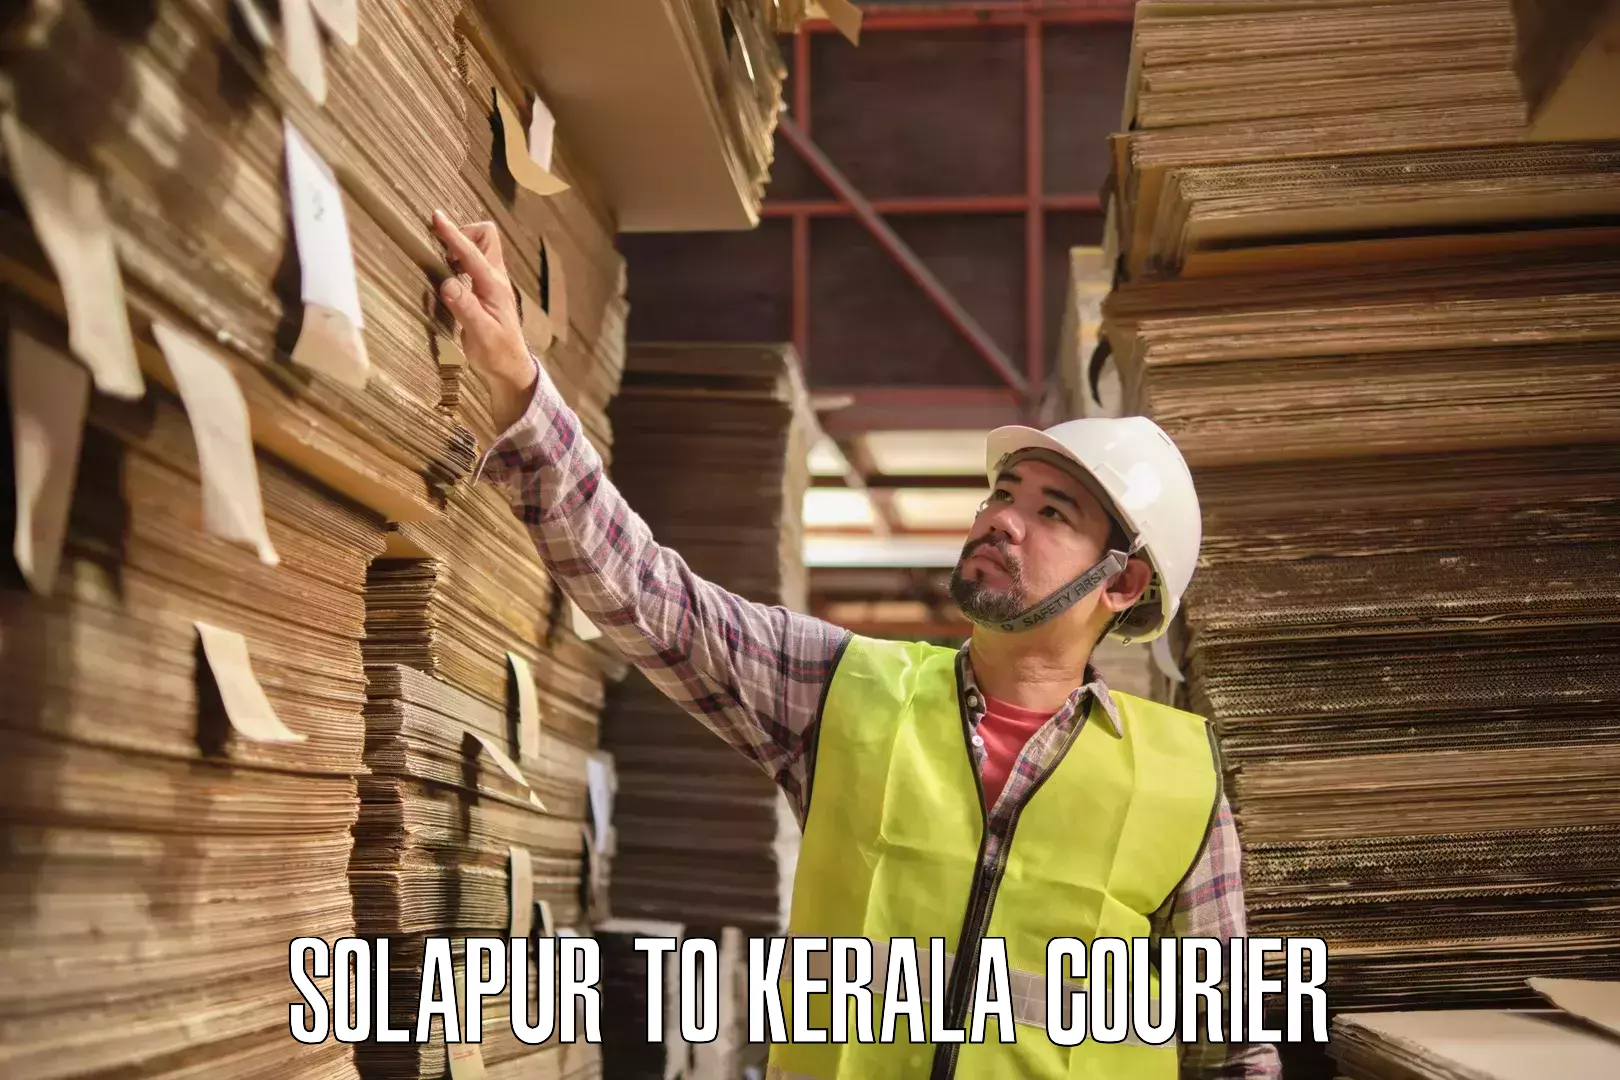 Reliable delivery network Solapur to Kochi